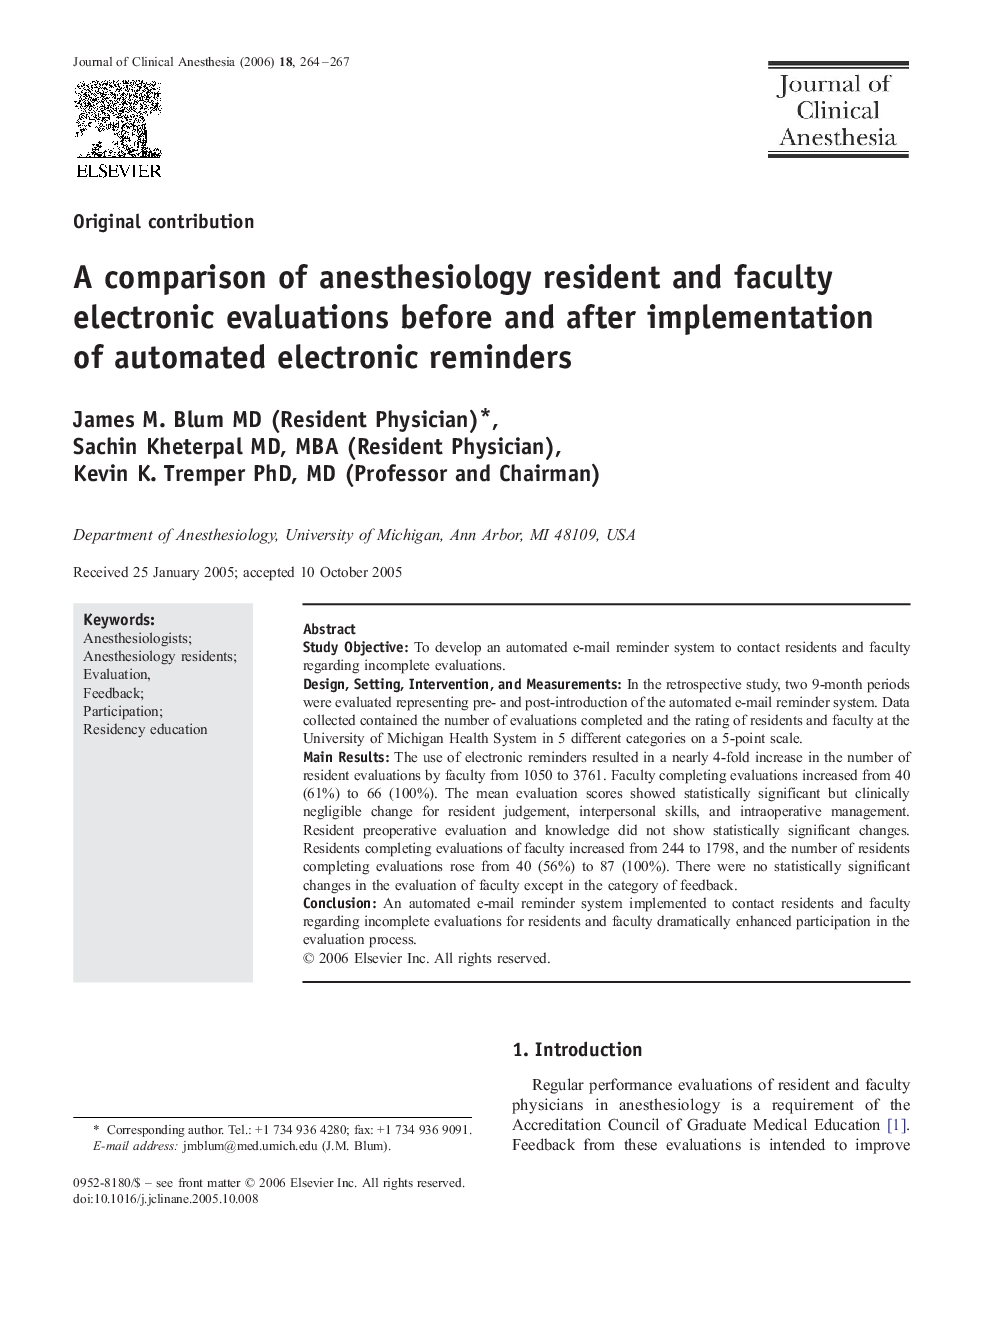 A comparison of anesthesiology resident and faculty electronic evaluations before and after implementation of automated electronic reminders